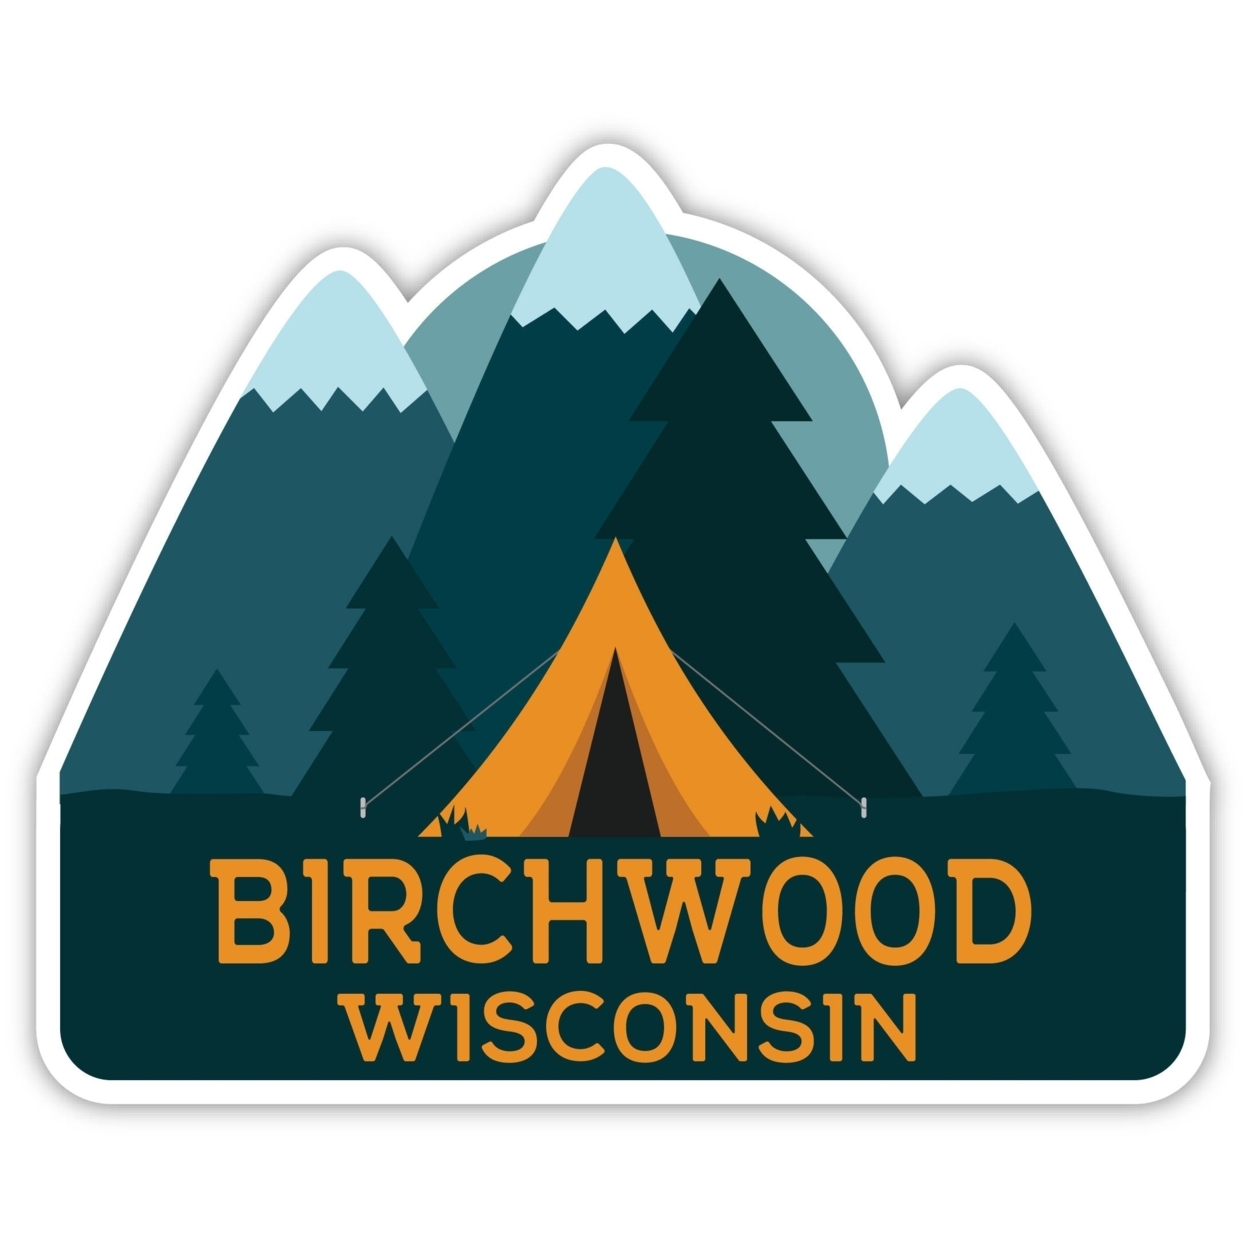 Birchwood Wisconsin Souvenir Decorative Stickers (Choose Theme And Size) - 4-Pack, 8-Inch, Tent